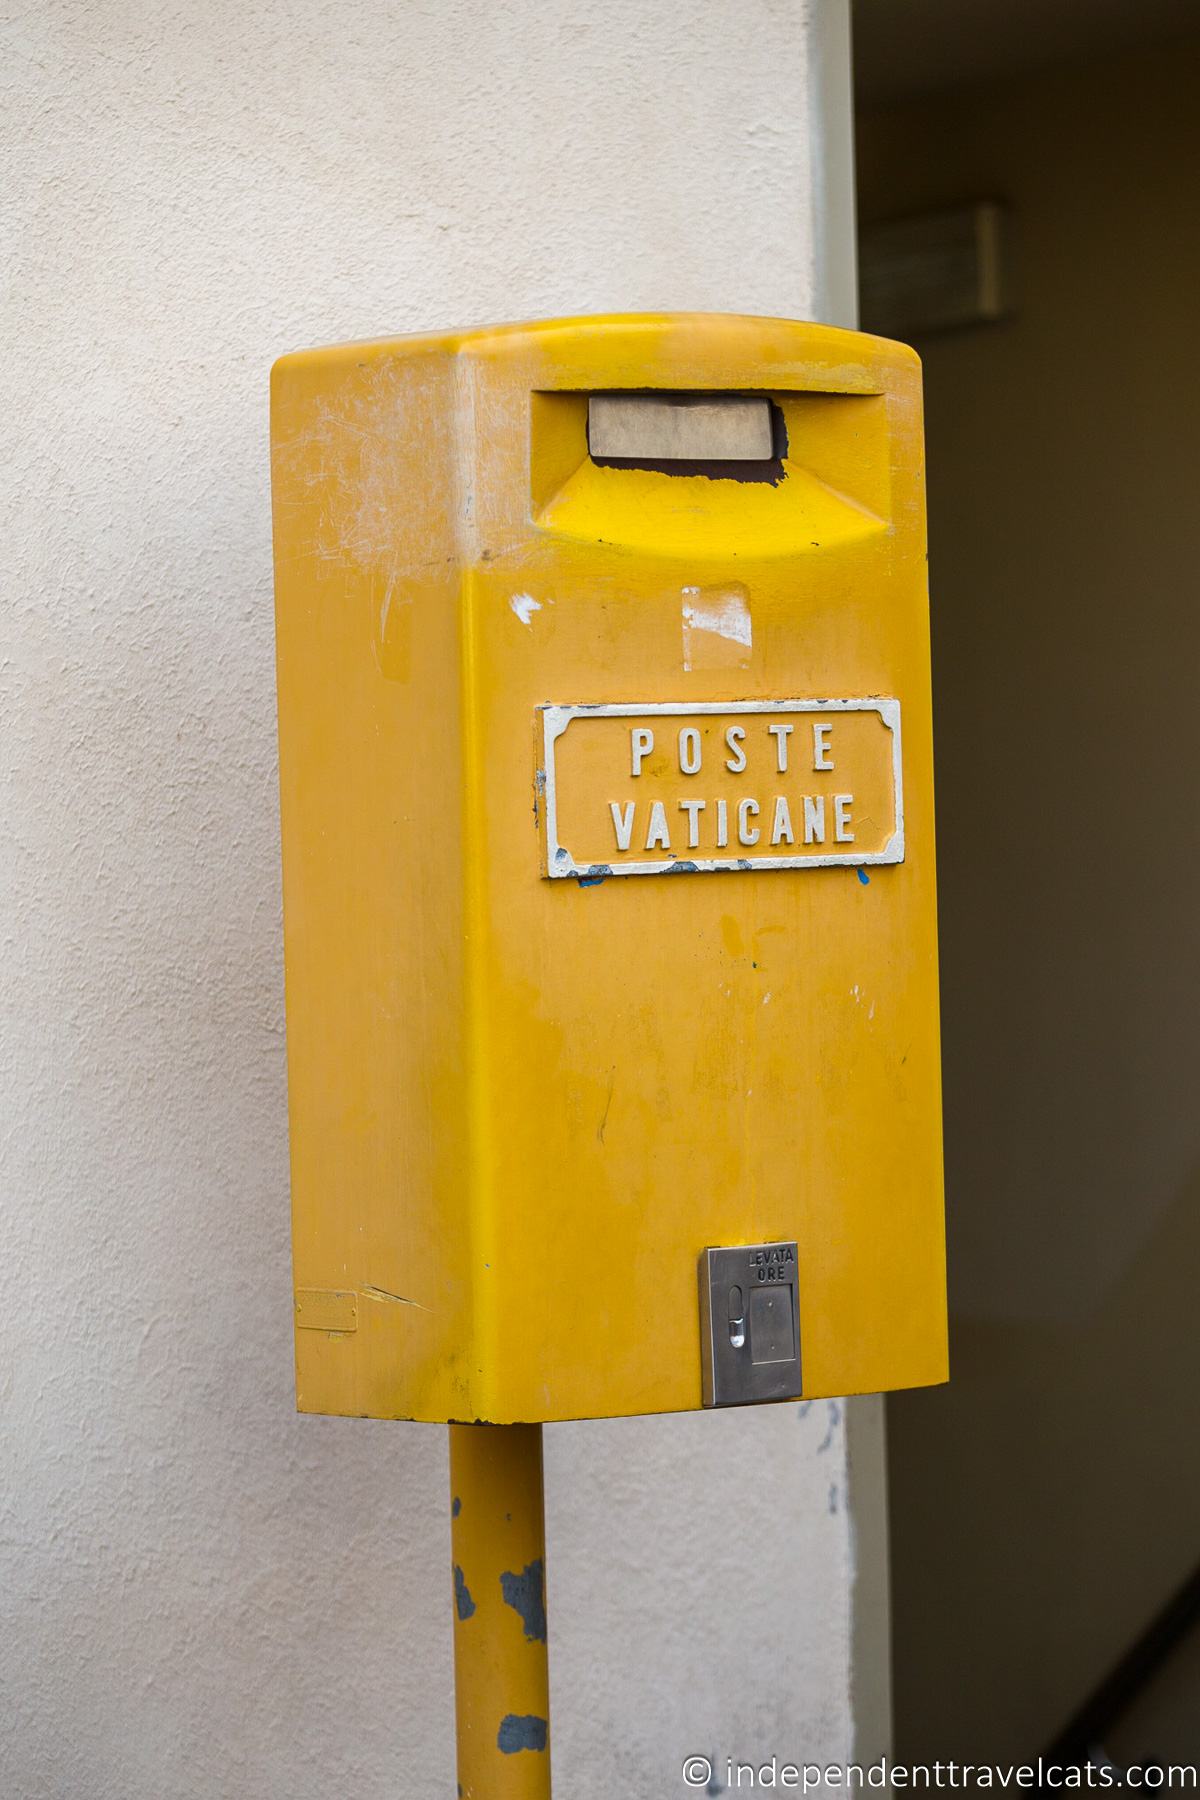 Poste Vaticane yellow mailbox how to send mail from the Vatican Vatican City